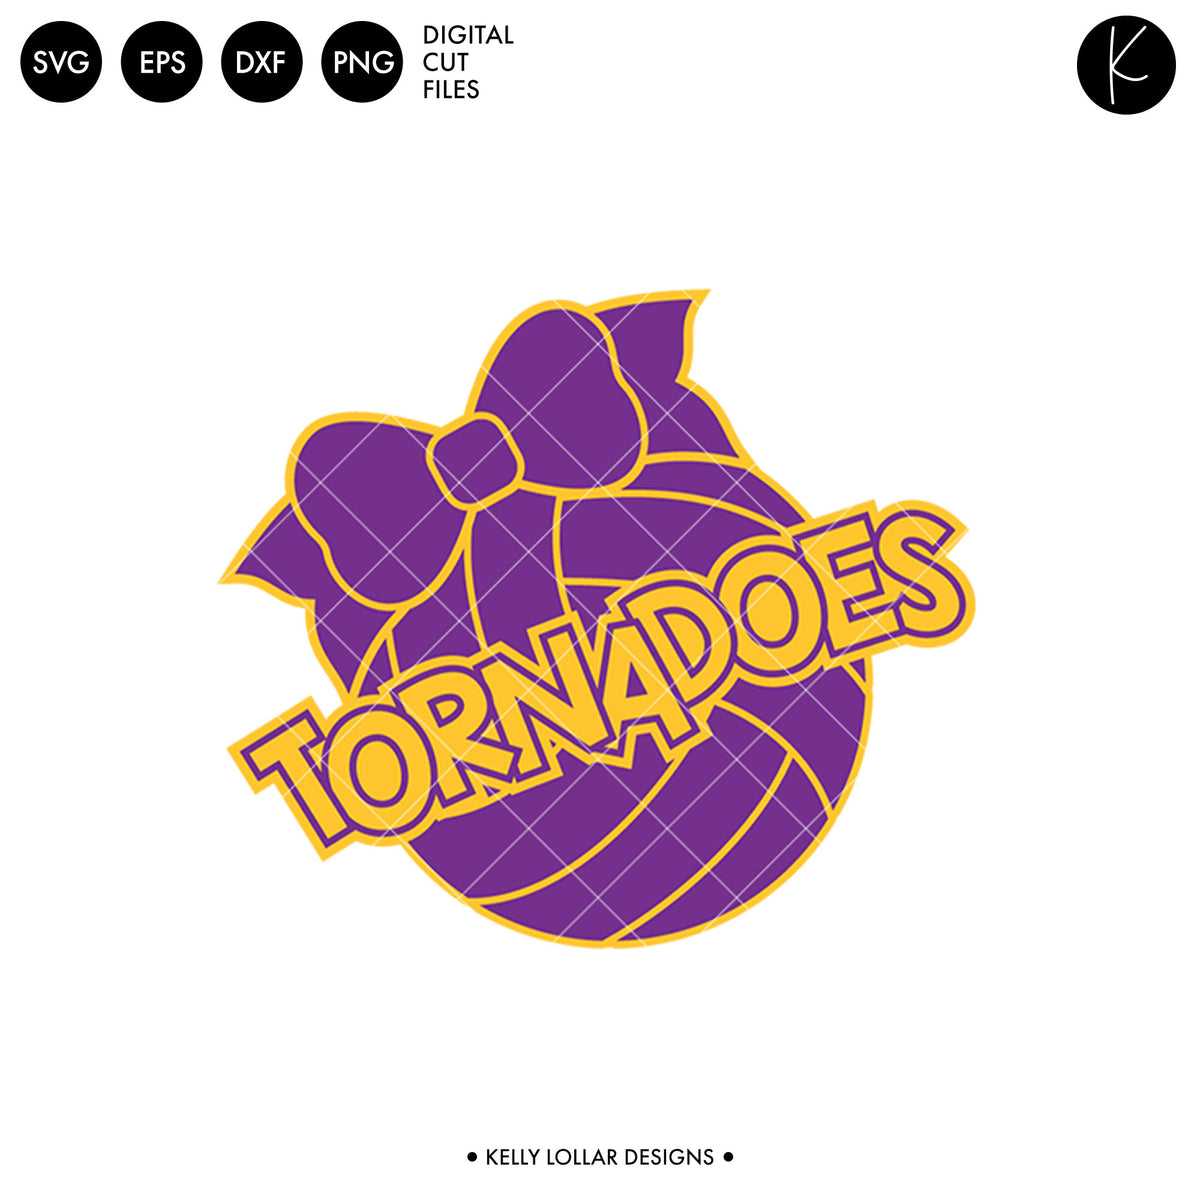 Tornadoes Volleyball Bundle | SVG DXF EPS PNG Cut Files